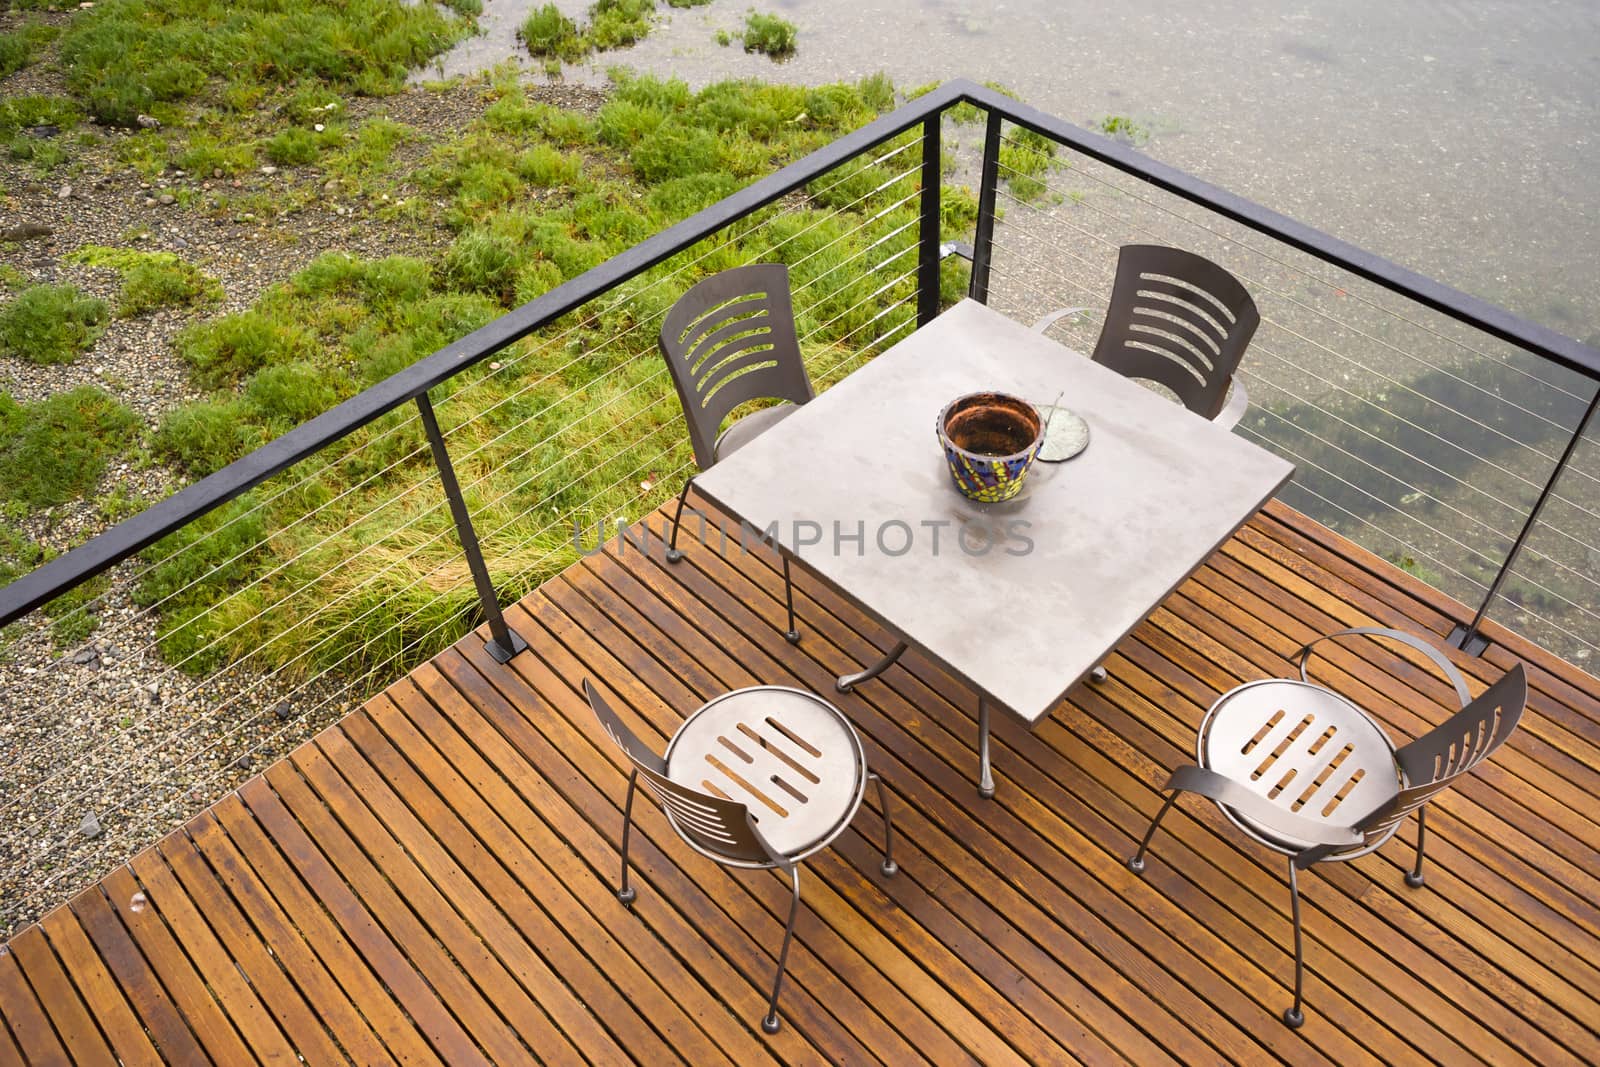 Wood Plank Deck Patio Beach Water Stanless Steel Dining Set by ChrisBoswell